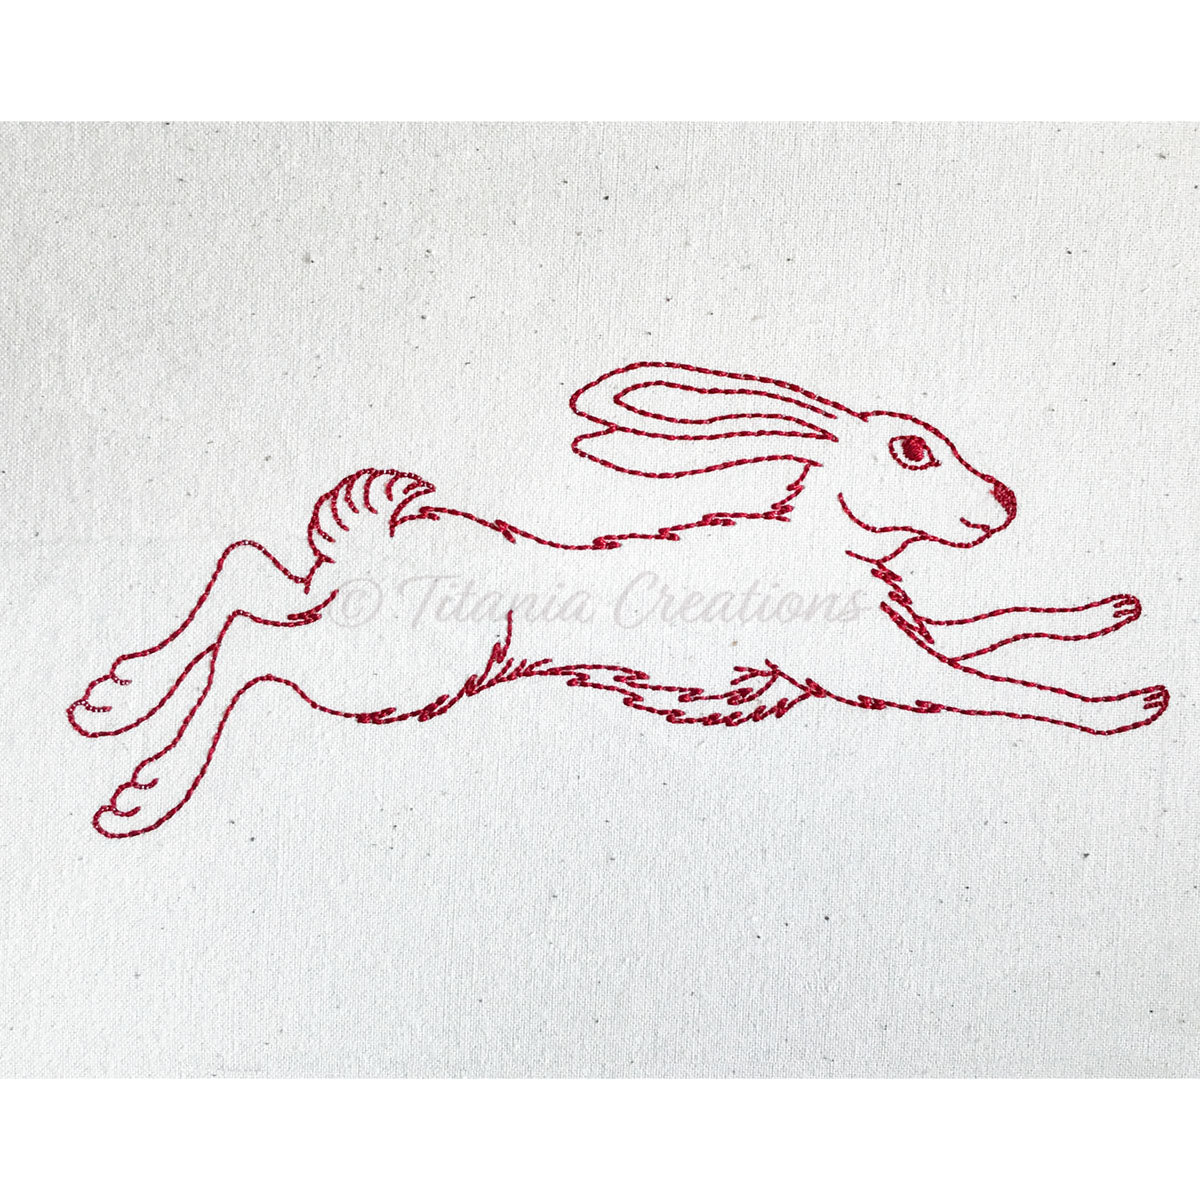 Leaping Hare 4x4 5x7 6x10